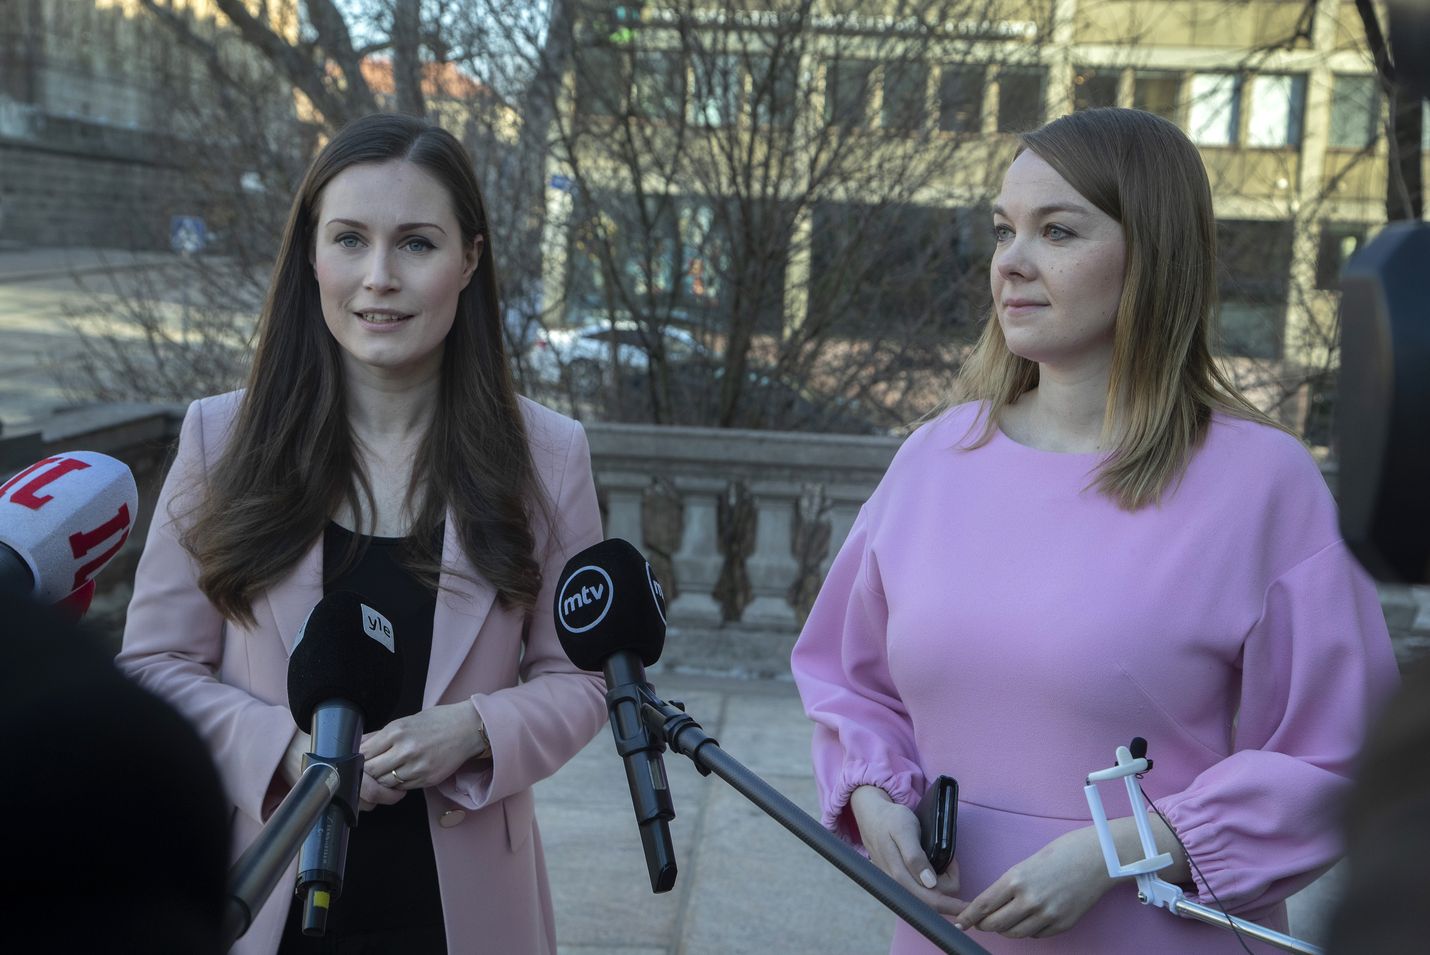 Finnish government ministers are meeting for two days of budget talks largely focused on the impact of the coronavirus pandemic. Prime Minister Sanna Marin (SDP), left, and Finance Minister (Katri Kulmuni) are the key politicians in tackling the economic crisis.